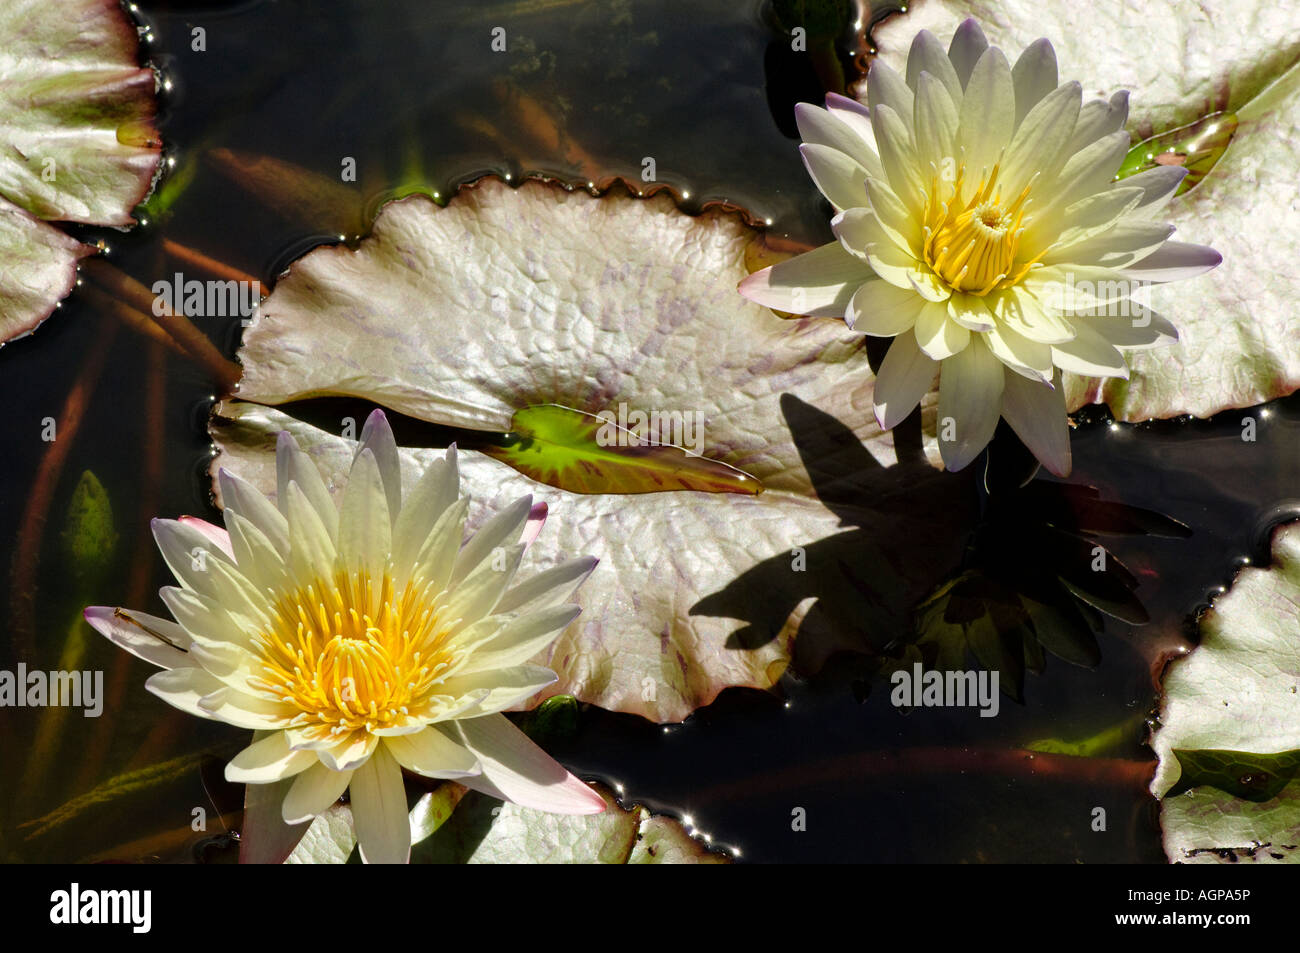 Two waterlilies with a dragonfly on one Stock Photo